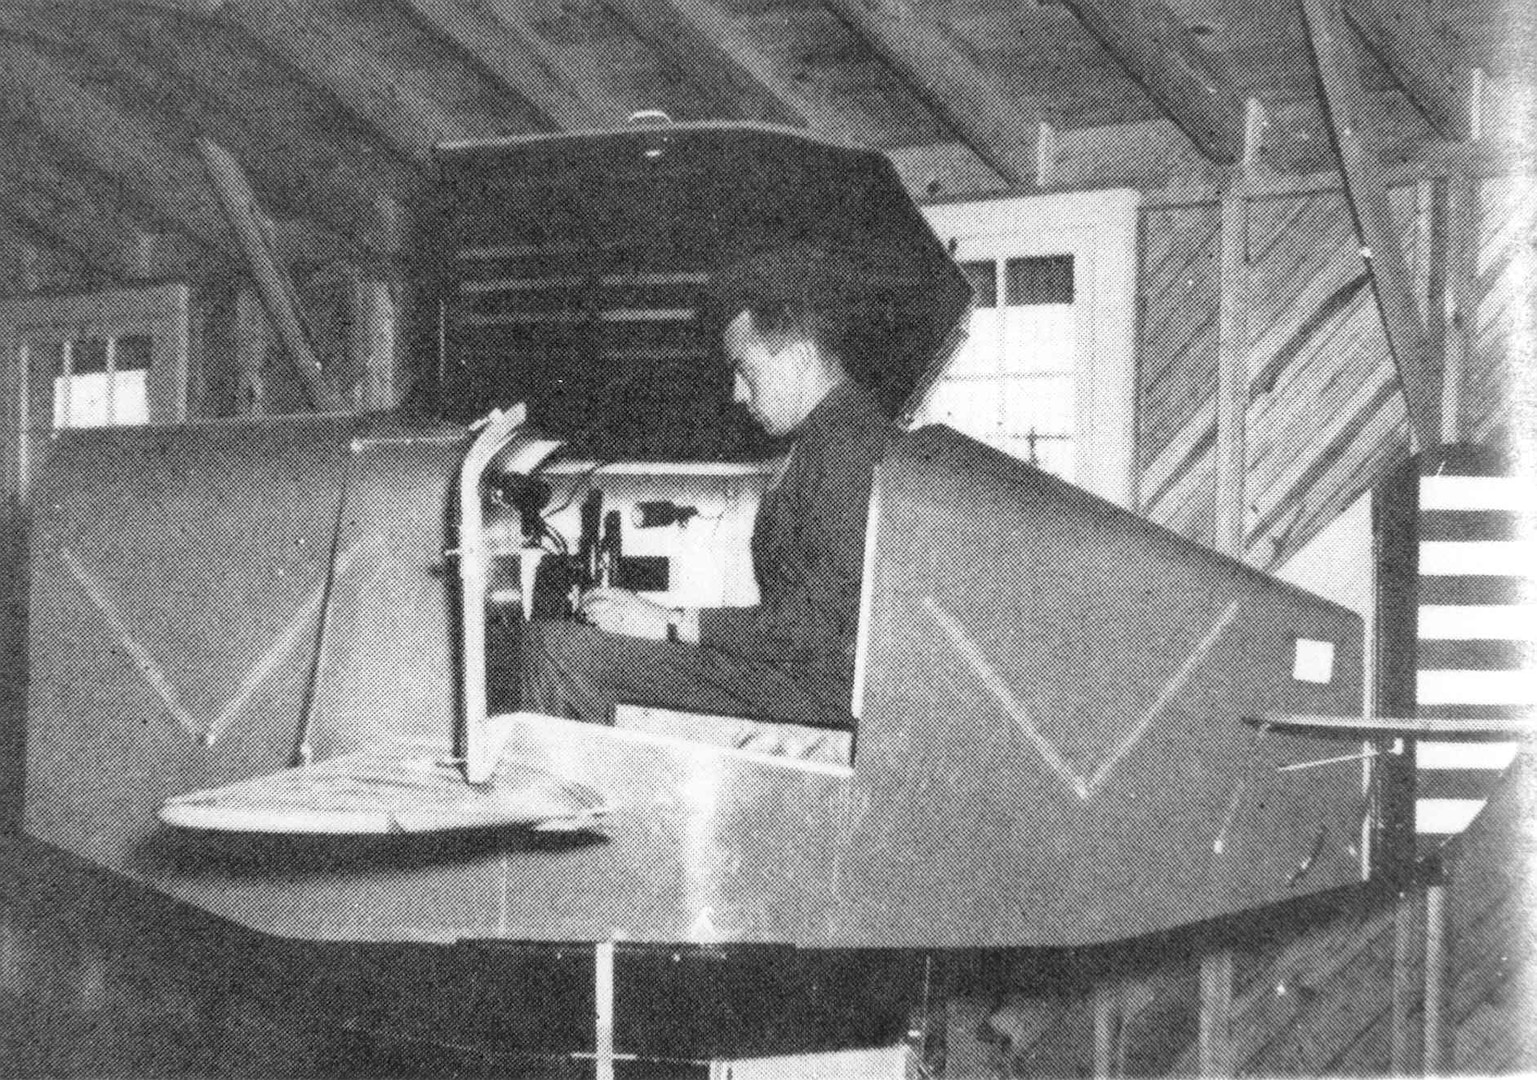 A student during the World War II era uses a Link Trainer, an early type of flight simulator